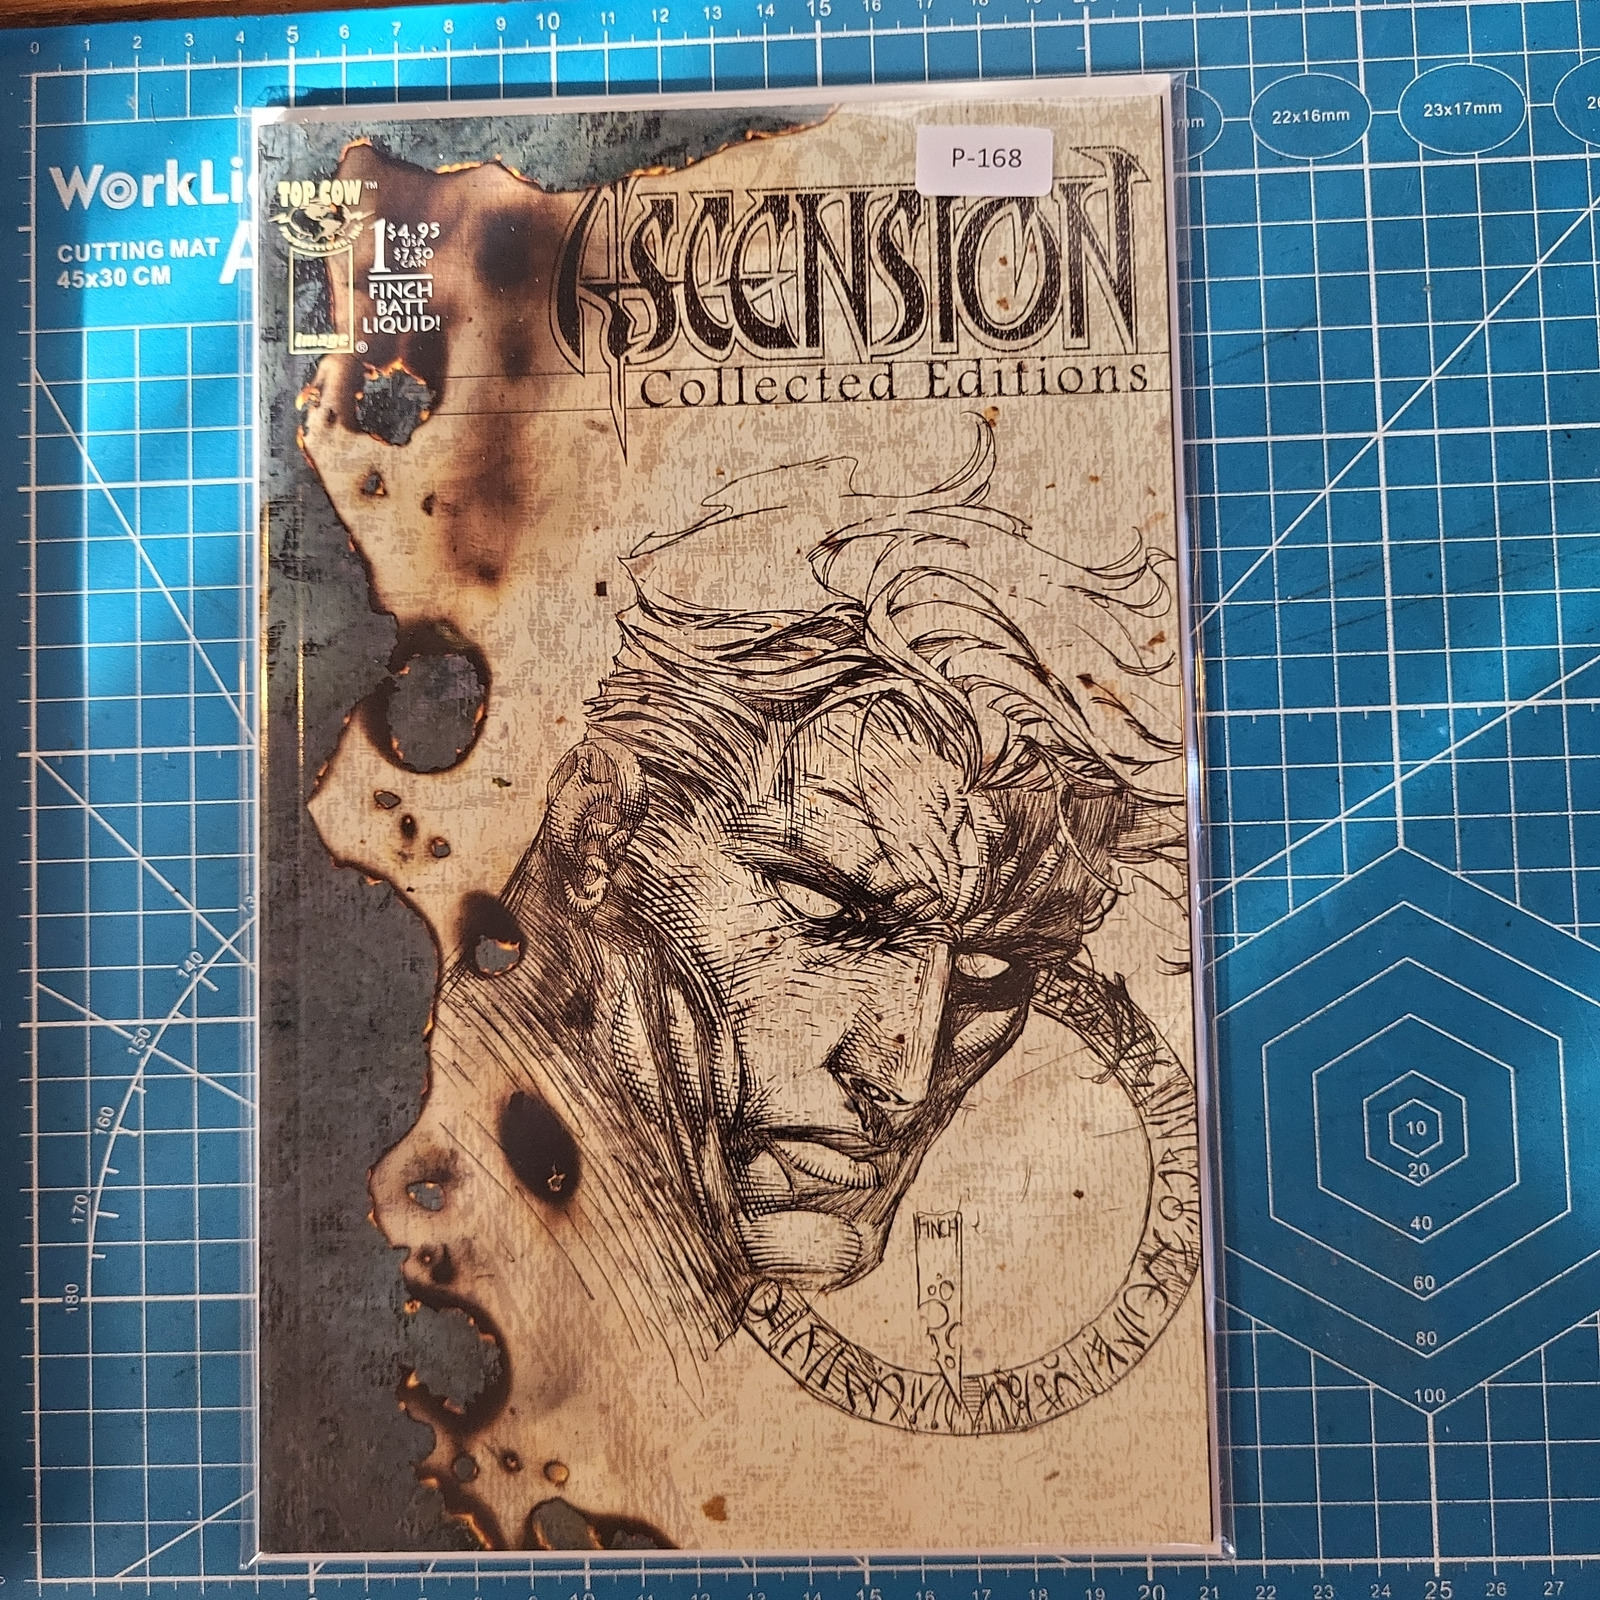 ASCENSION: COLLECTED EDITION #1 MINI 9.0+ TOP COW PRODUCTIONS COMIC BOOK P-168